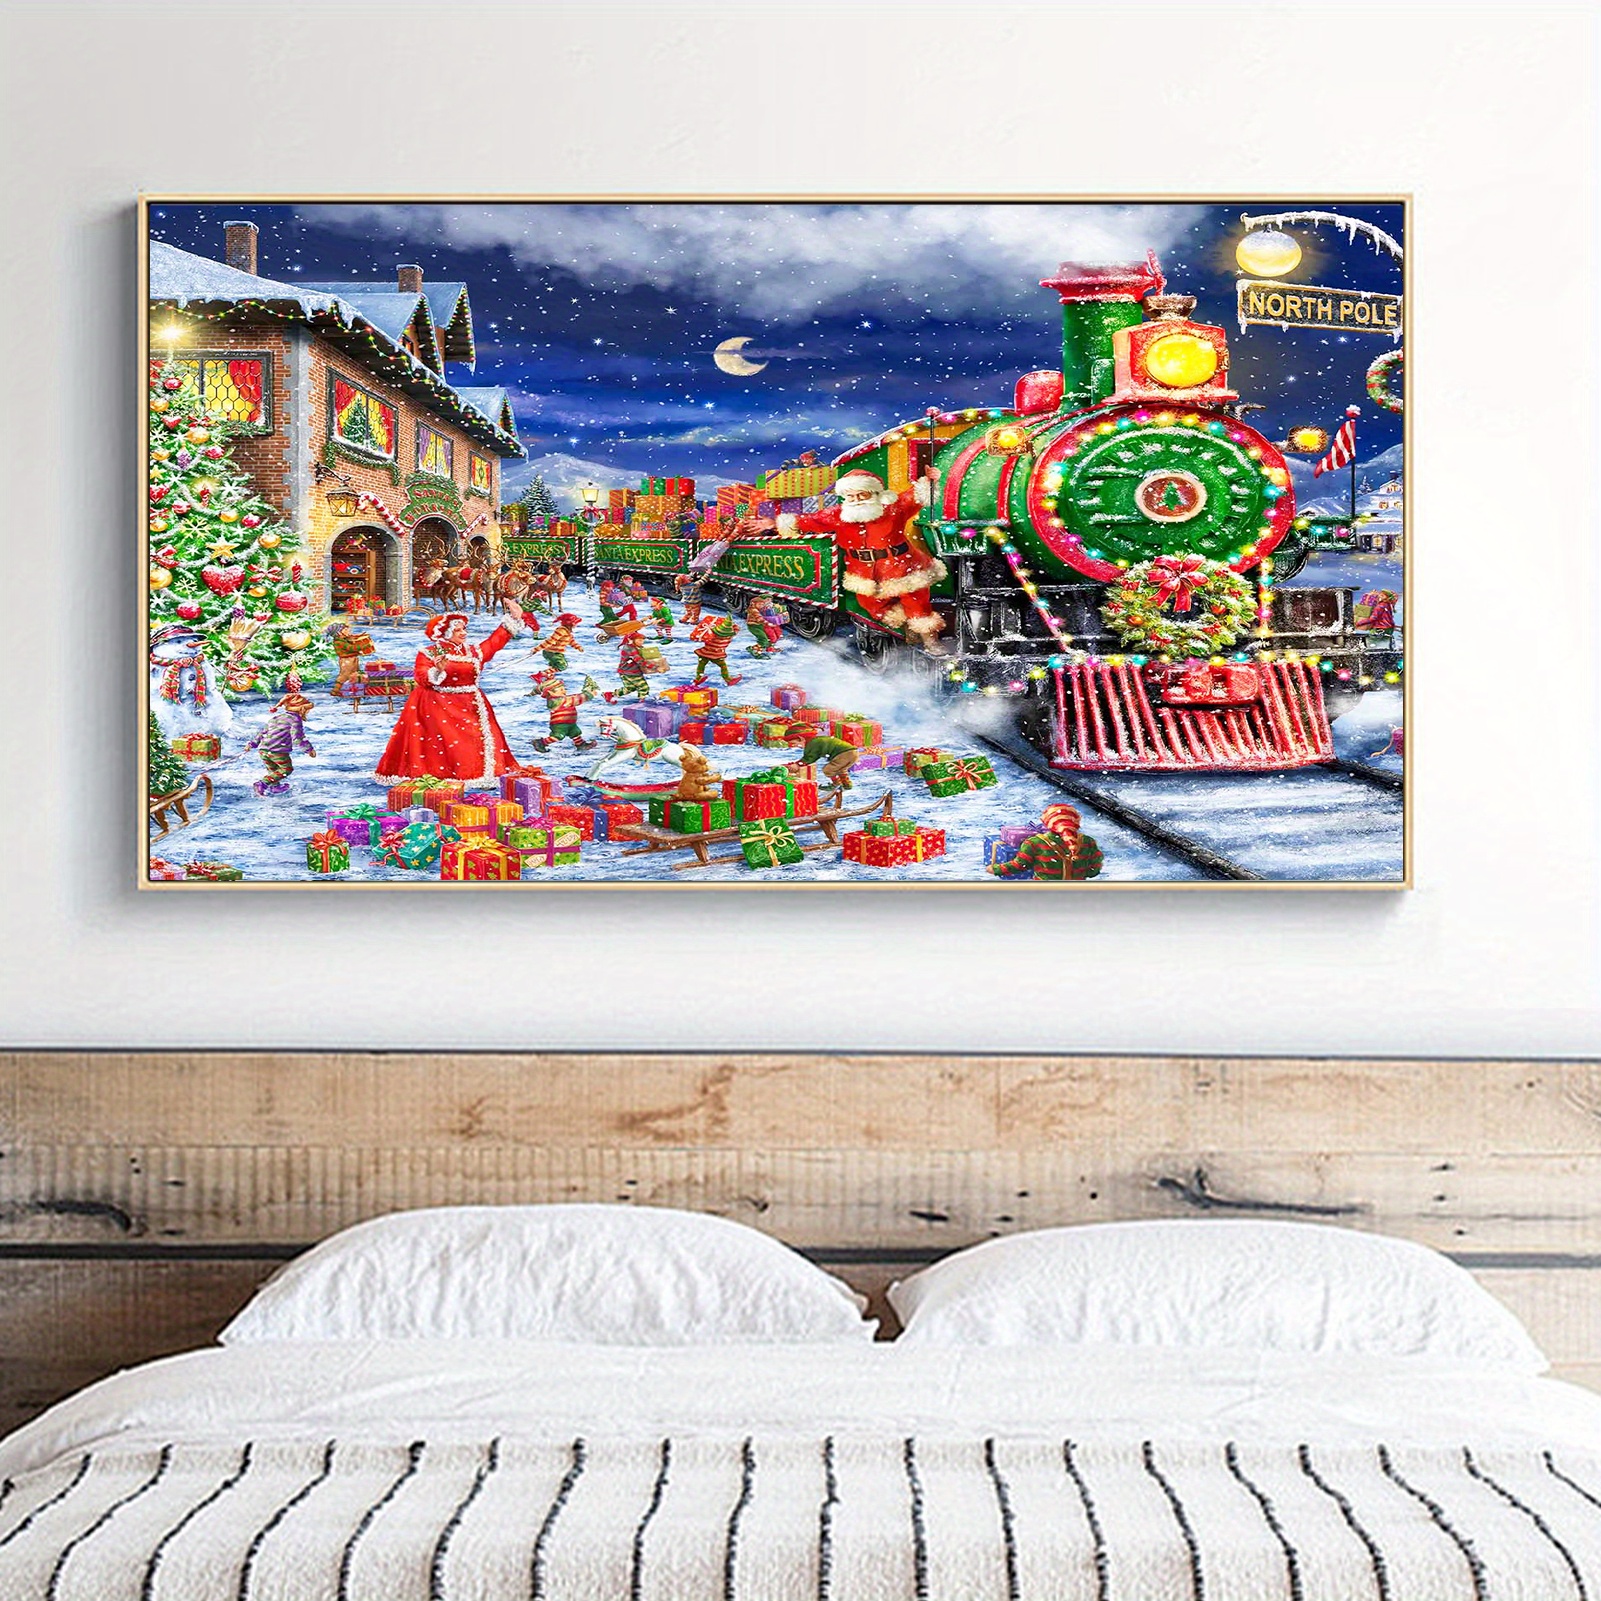 5D DIY Large Diamond Painting Kits For Adult, 15.7x27.5inch/40x70cm  Christmas Train Round Full Artificial Diamond Art Kits Picture By Number  Kits For